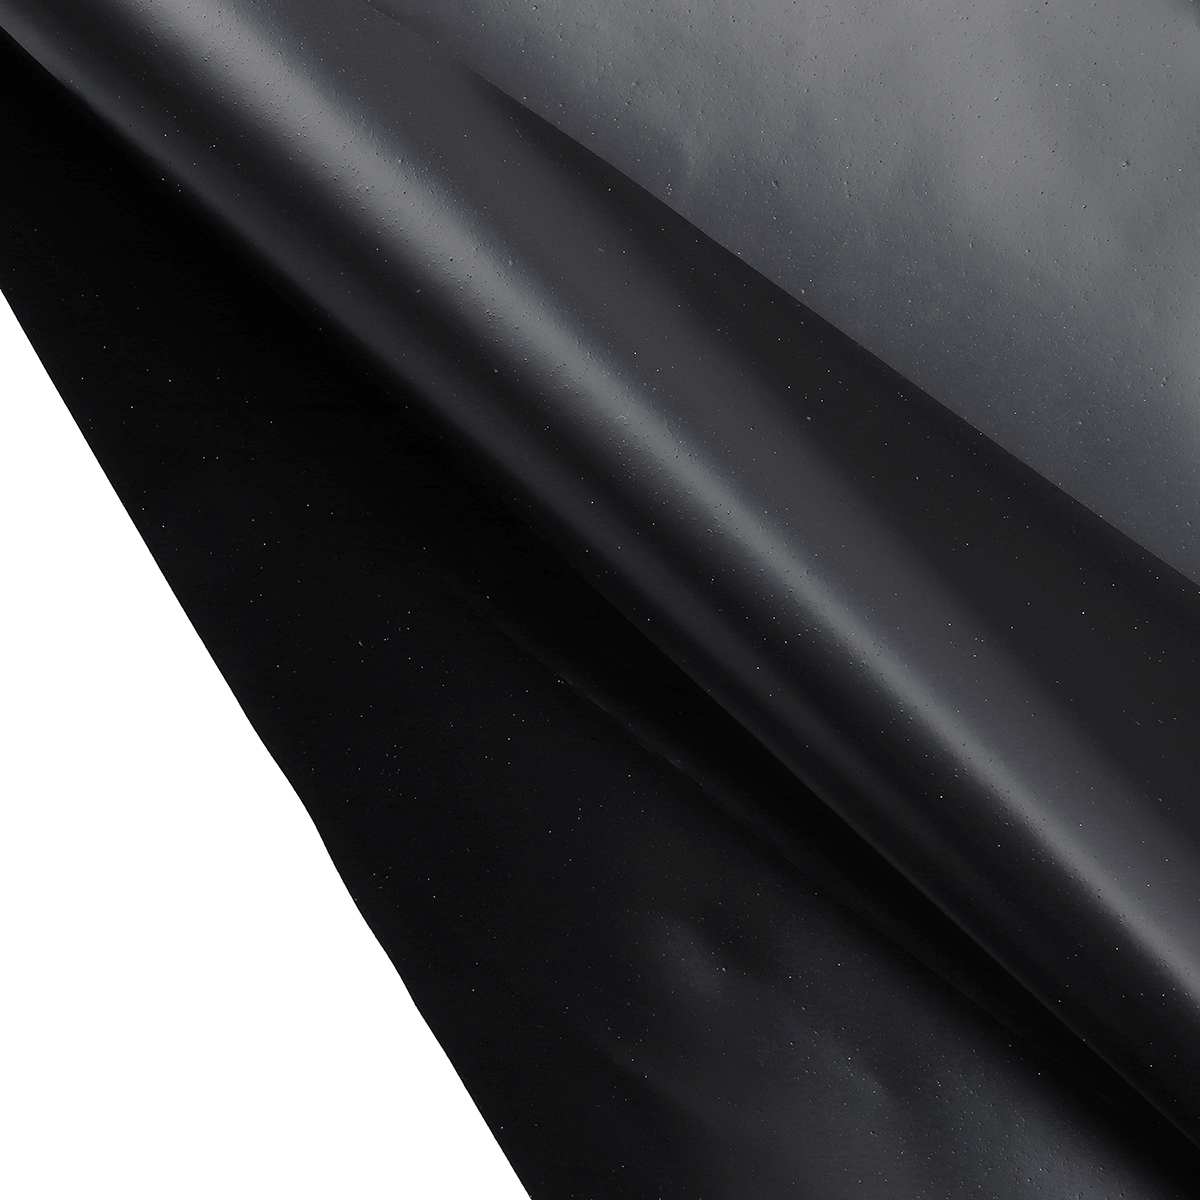 New Fish Pond Liner Cloth Home Garden Pool Reinforced HDPE Heavy Landscaping Pool Pond Waterproof Geomembrane Liner Cloth Black